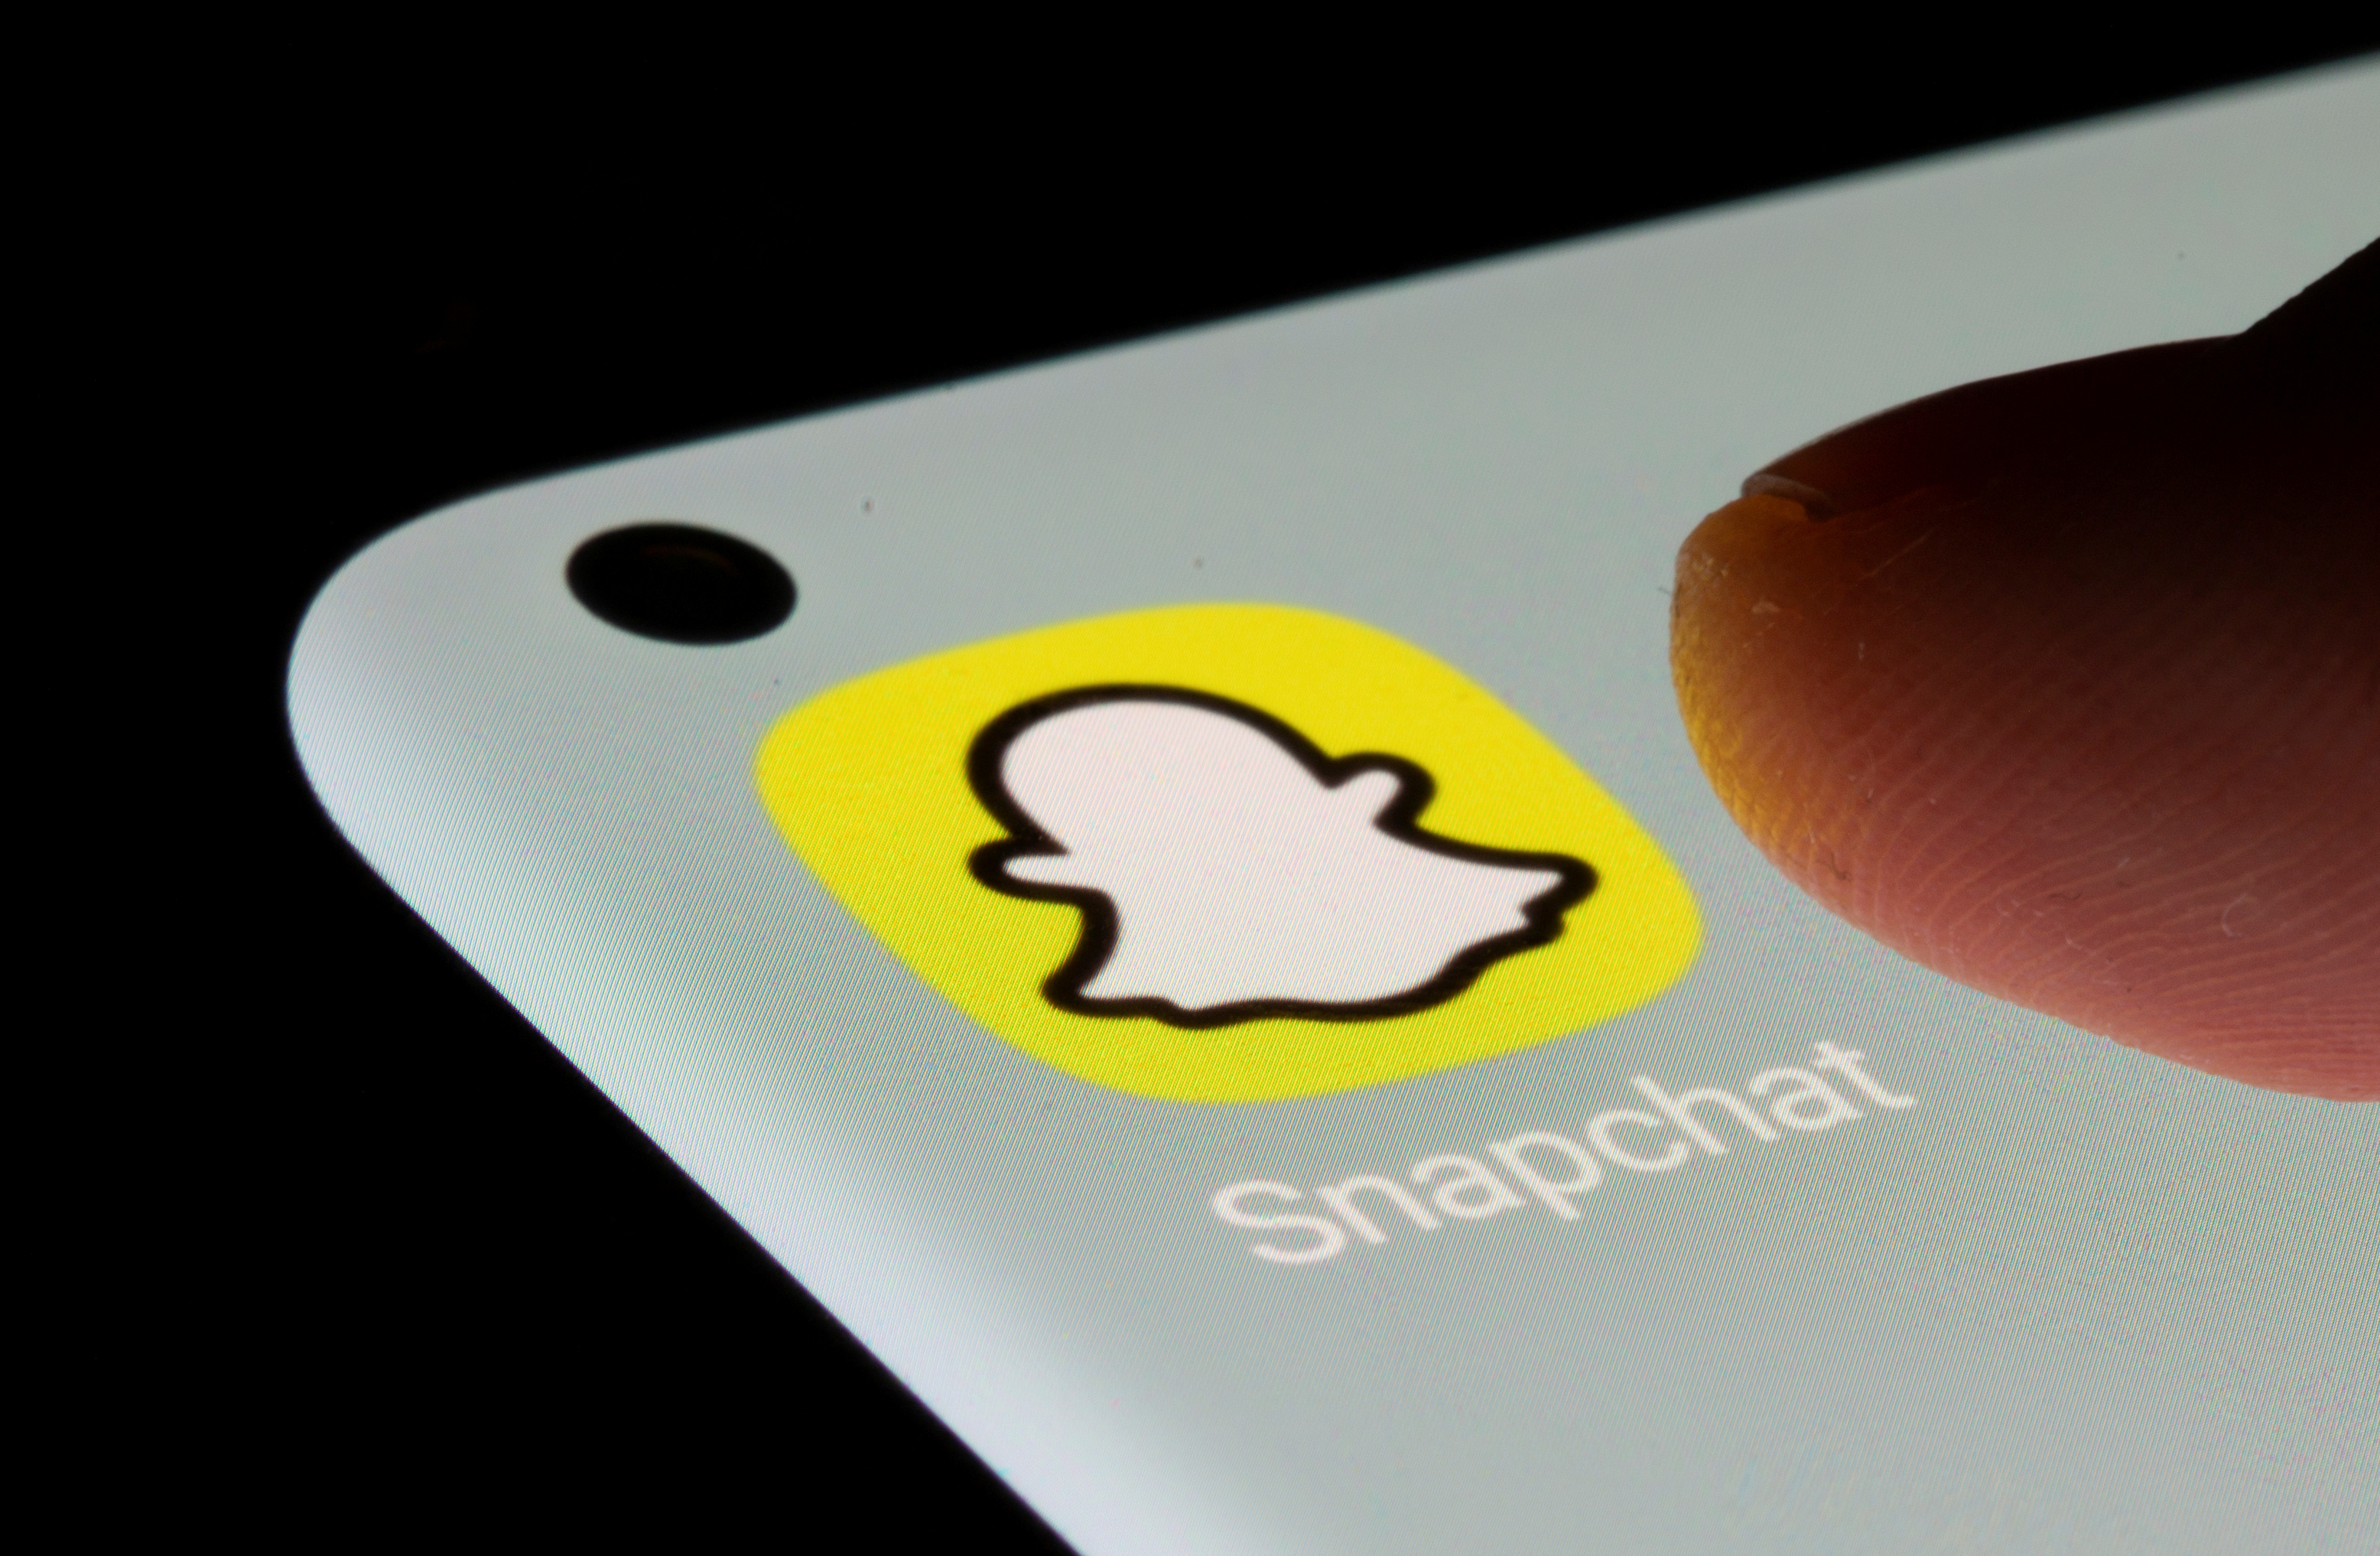 Snapchat app is seen on a smartphone in this illustration